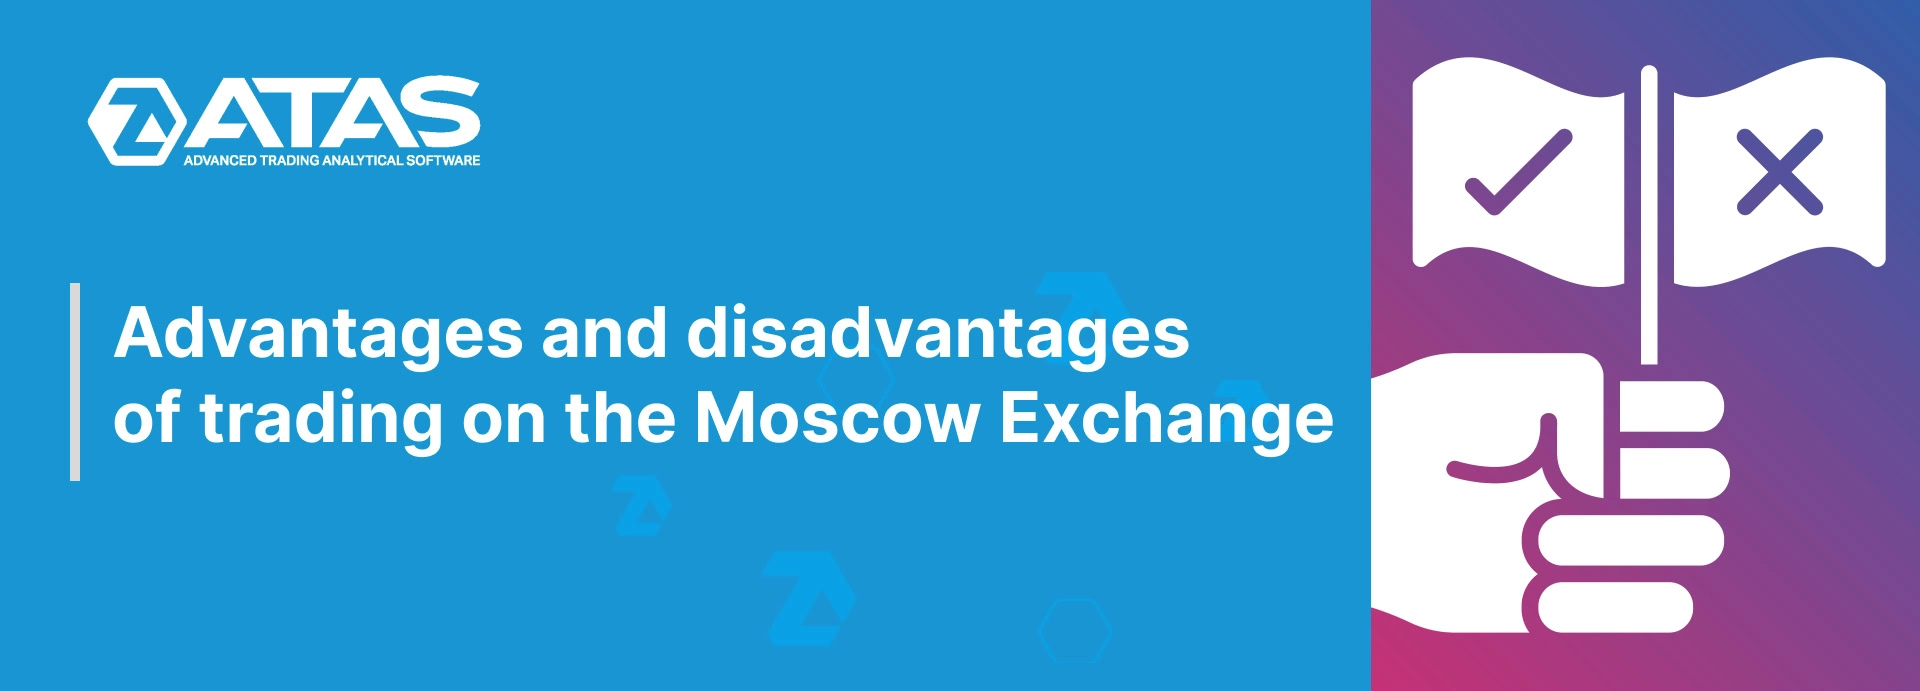 Advantages and disadvantages of trading on the Moscow Exchange